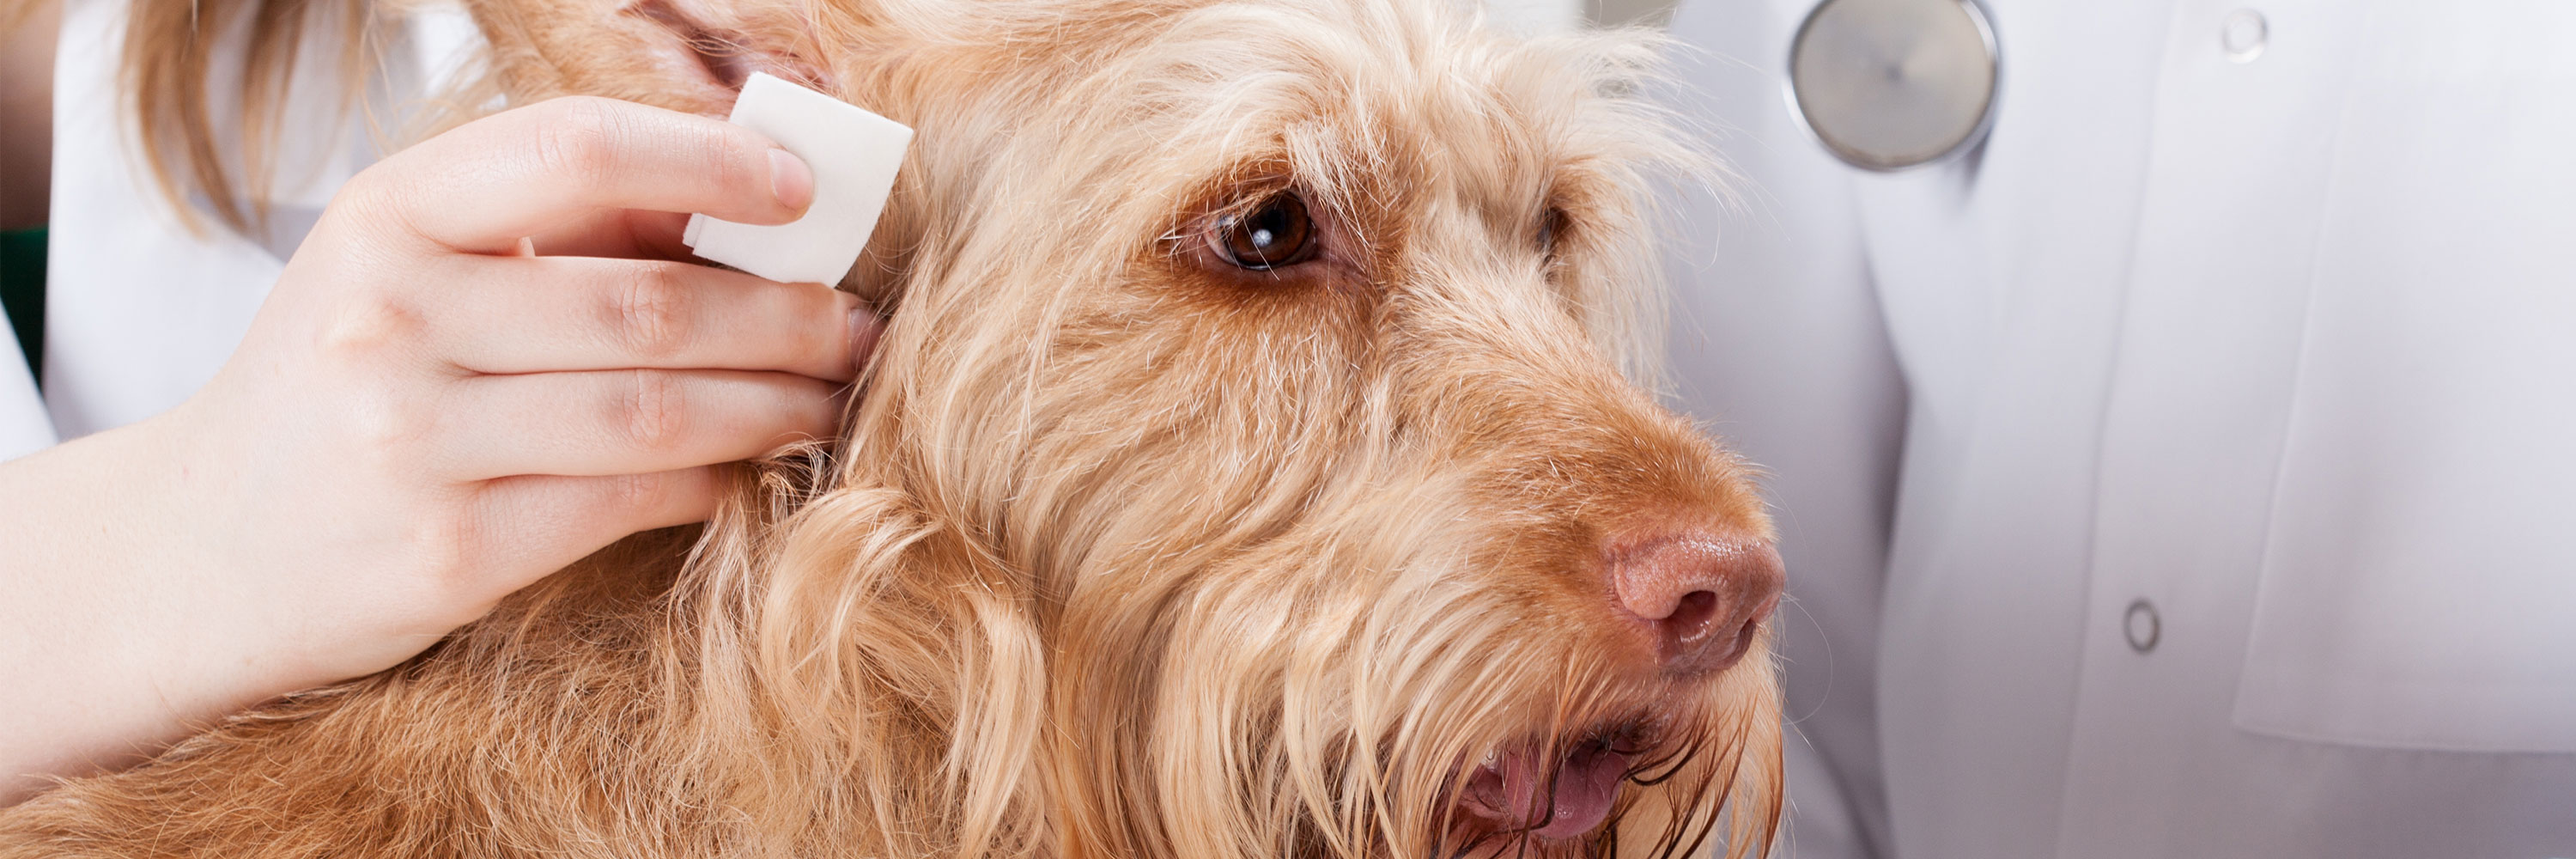 are ear infections contagious between dogs